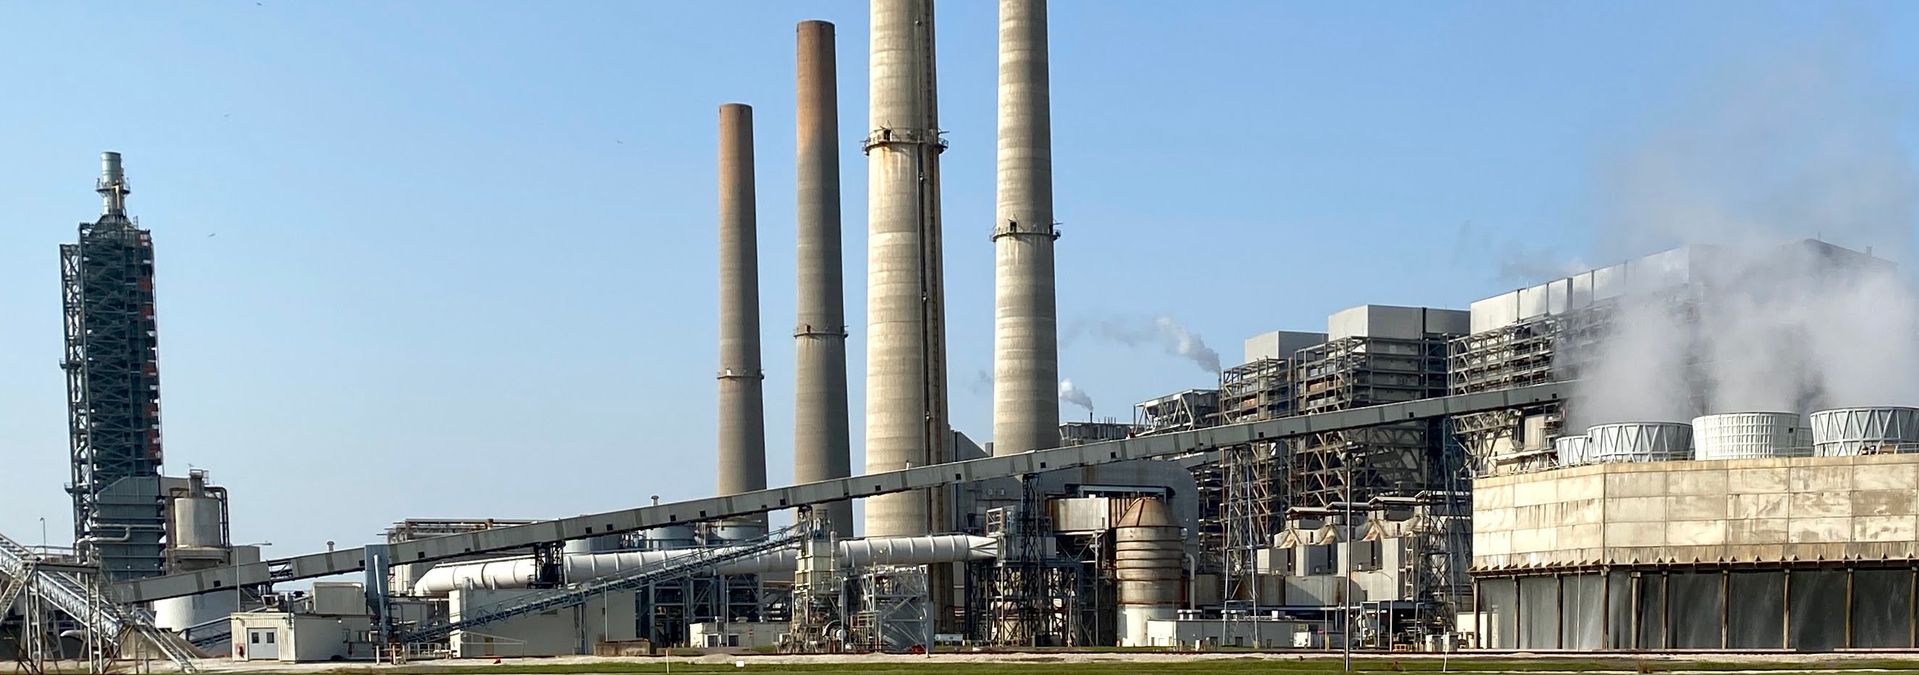 The W. A. Parish plant near Houston is the second-largest source of sulfur dioxide in Texas. Photo: Allyn West.